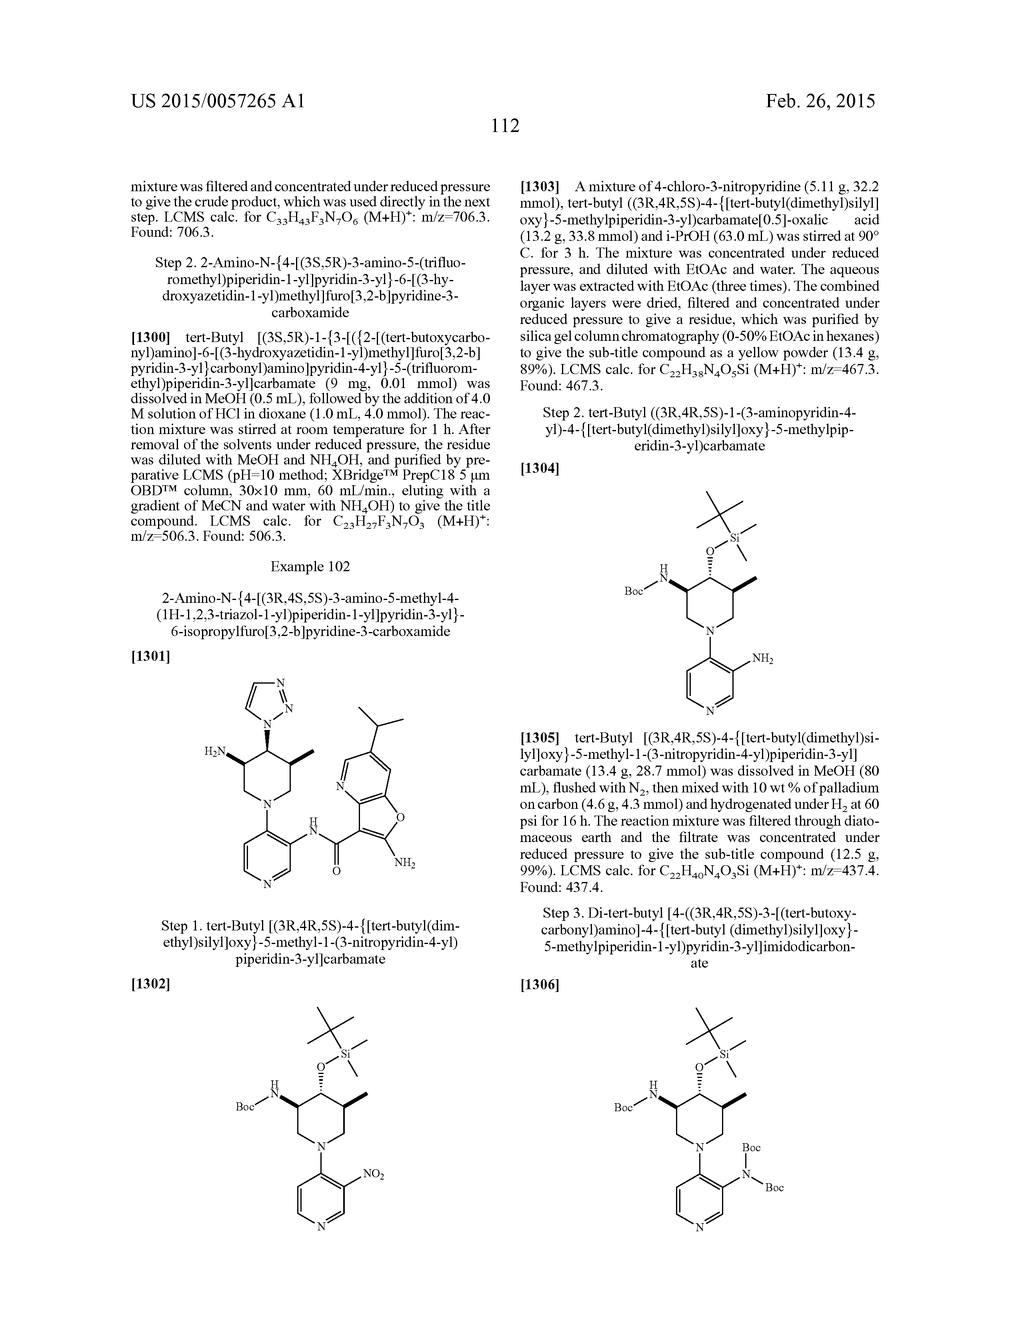 FURO- AND THIENO-PYRIDINE CARBOXAMIDE COMPOUNDS USEFUL AS PIM KINASE     INHIBITORS - diagram, schematic, and image 113